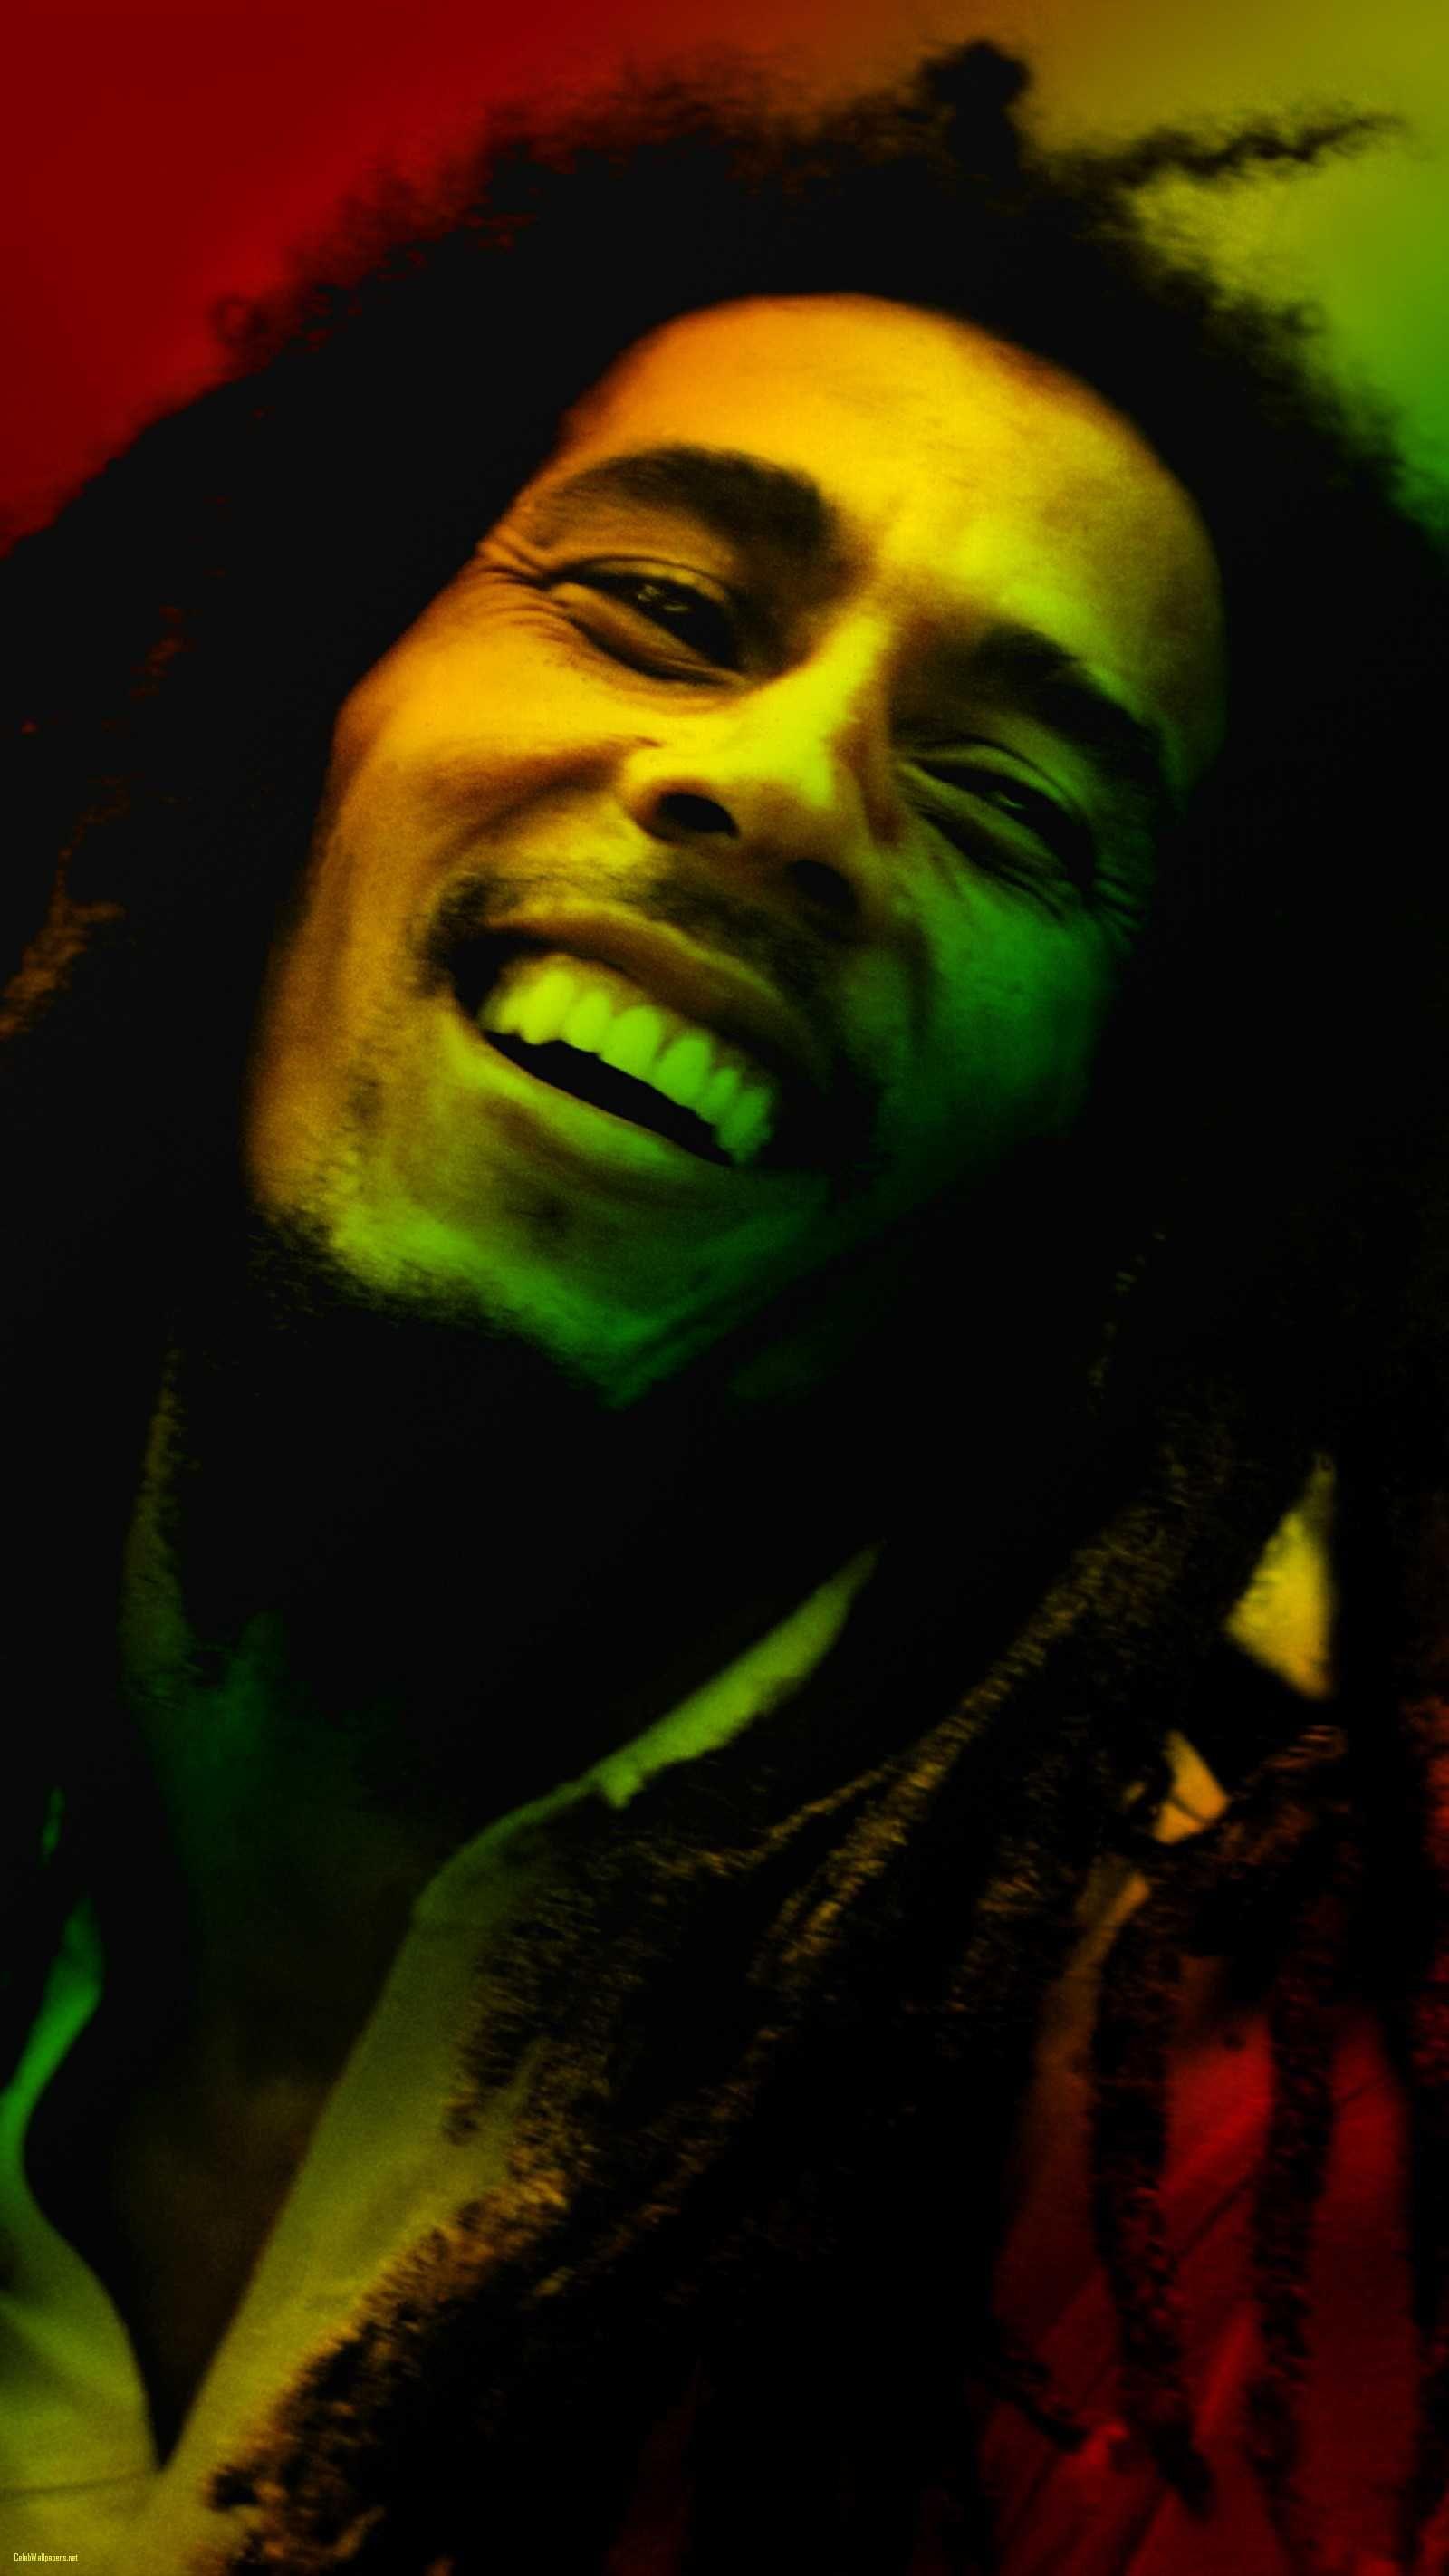 Hd Wallpapers For BOB MARLEY - Wallpaper Cave